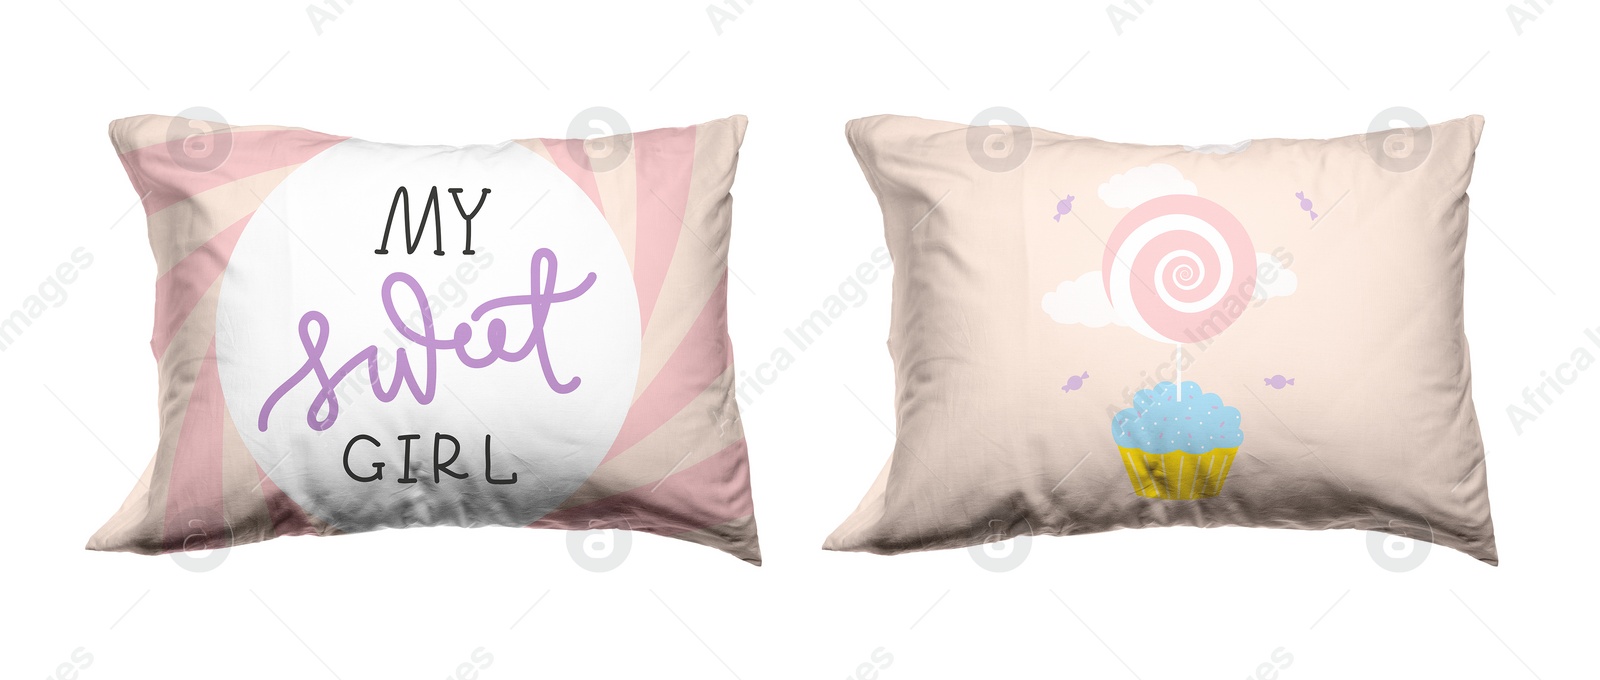 Image of Soft pillows with cute prints isolated on white